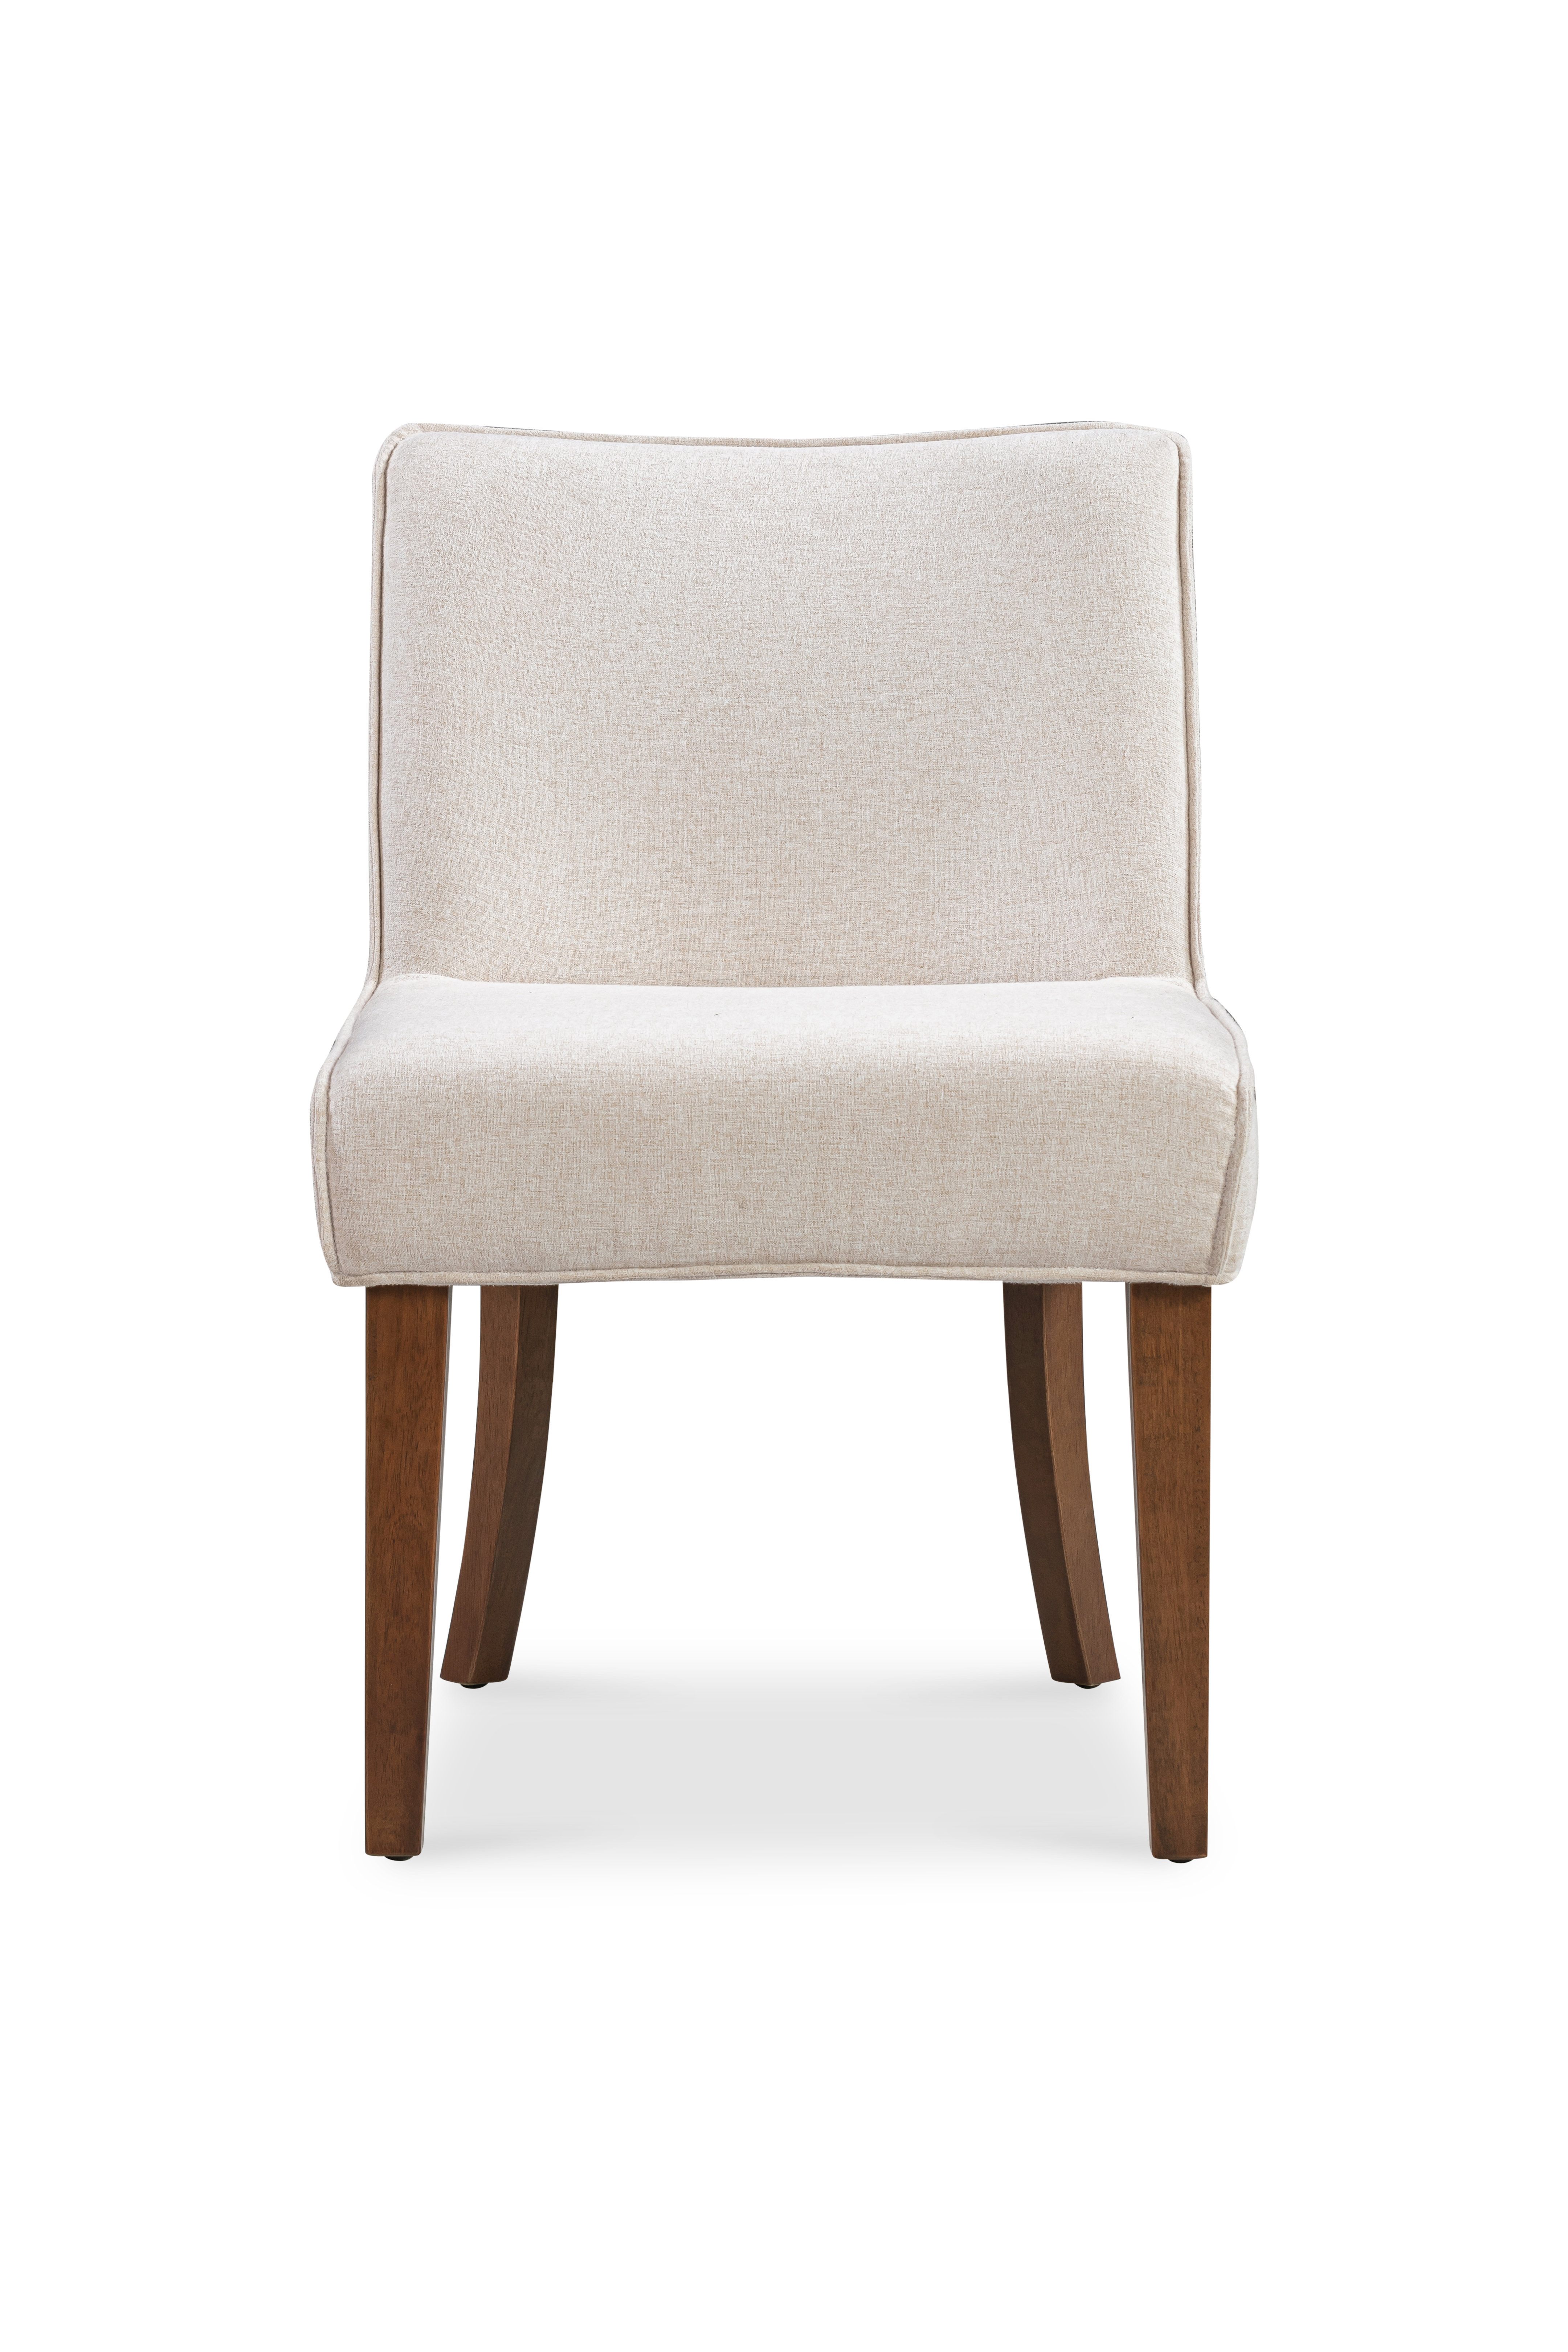 Gifford Upholstered King Louis Back Arm Chair Fairfield Chair Body Fabric:  9508 Smoke, Frame Color: Walnut - Yahoo Shopping